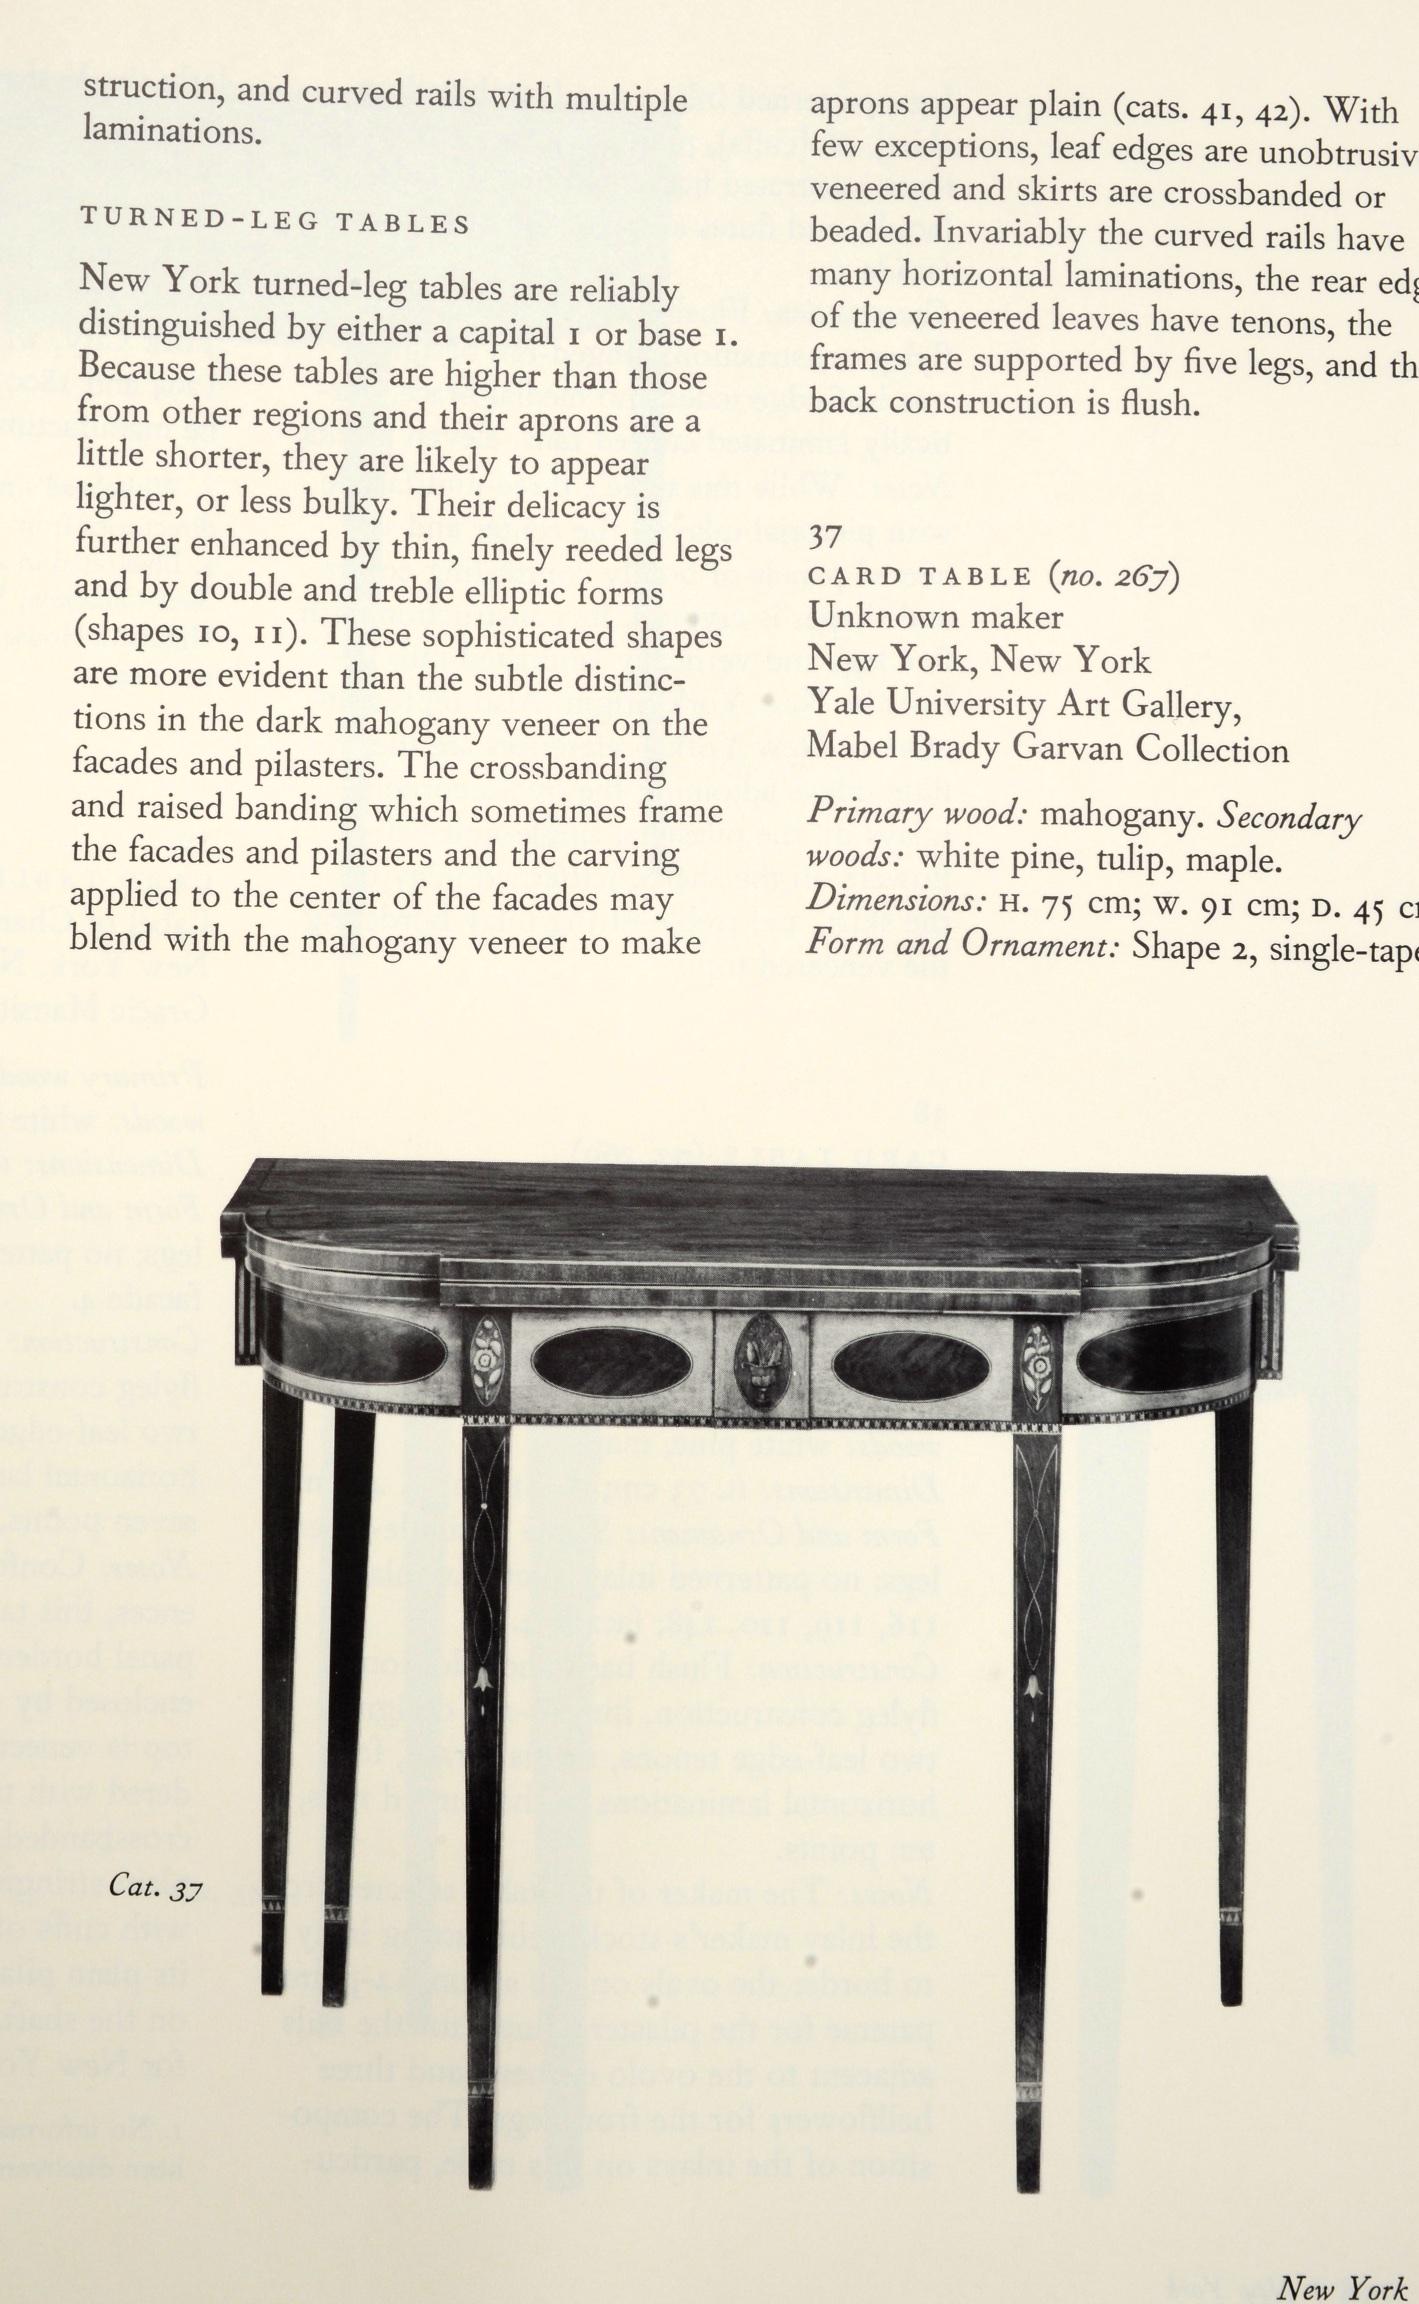 The Work of Many Hands: card tables in Federal America, 1790-1820 by Irving Sandler. Yale University Art Gallery, New Haven, 1982. First edition softcover. 98 pp. 8 color illustrations, and many b&w plates. The book was Issued in conjunction with a